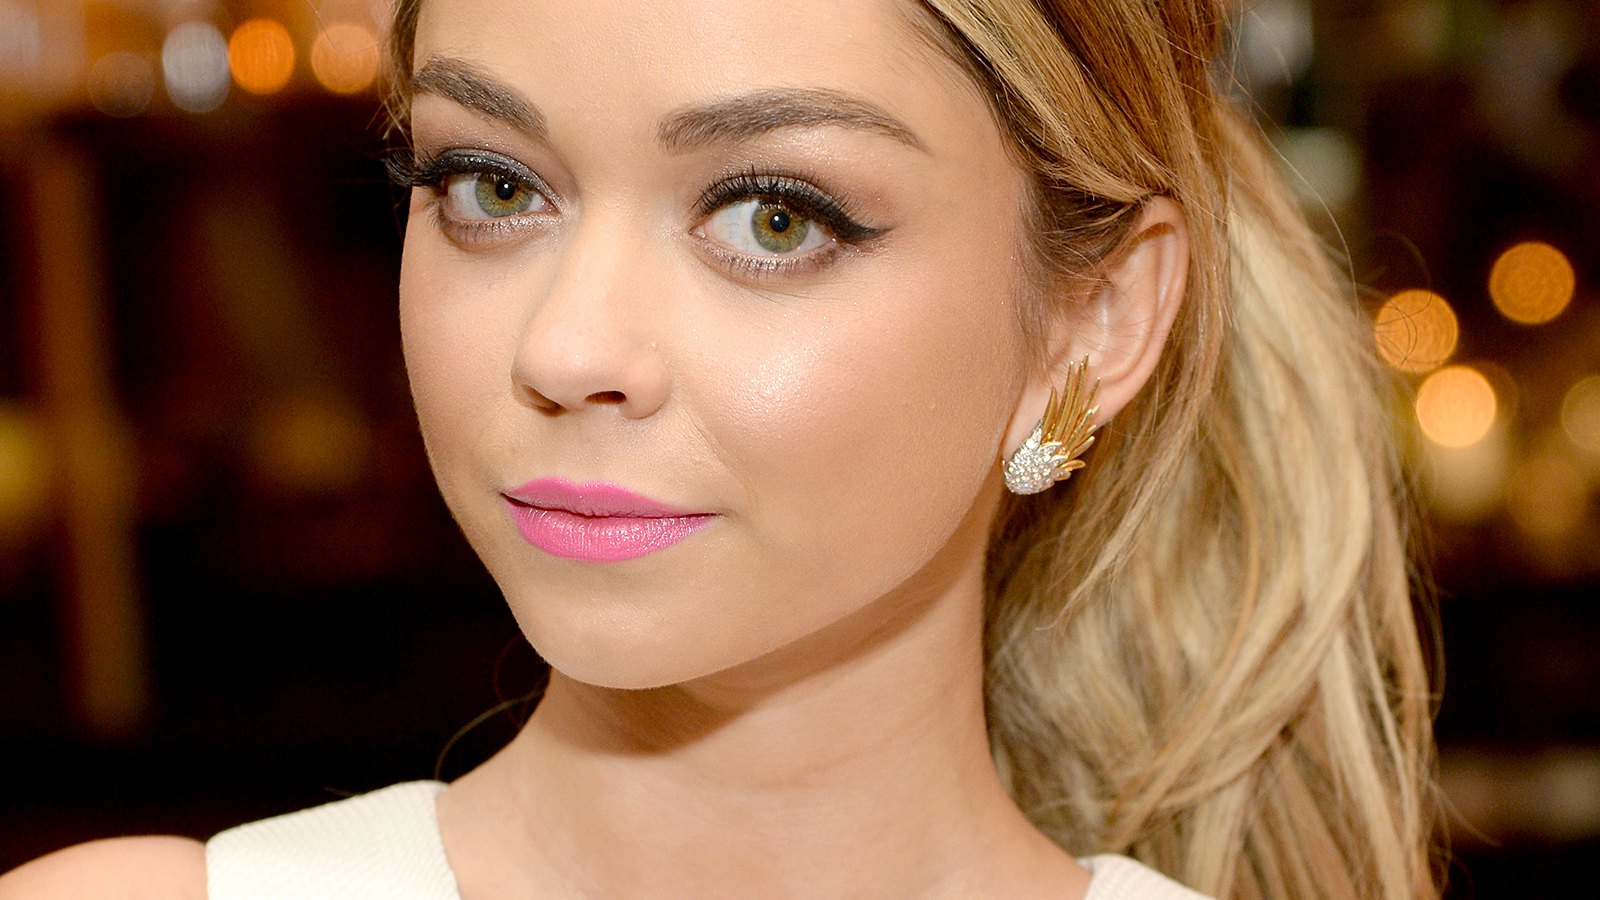 Sarah Hyland at ELLE's Annual Women in Television Celebration.